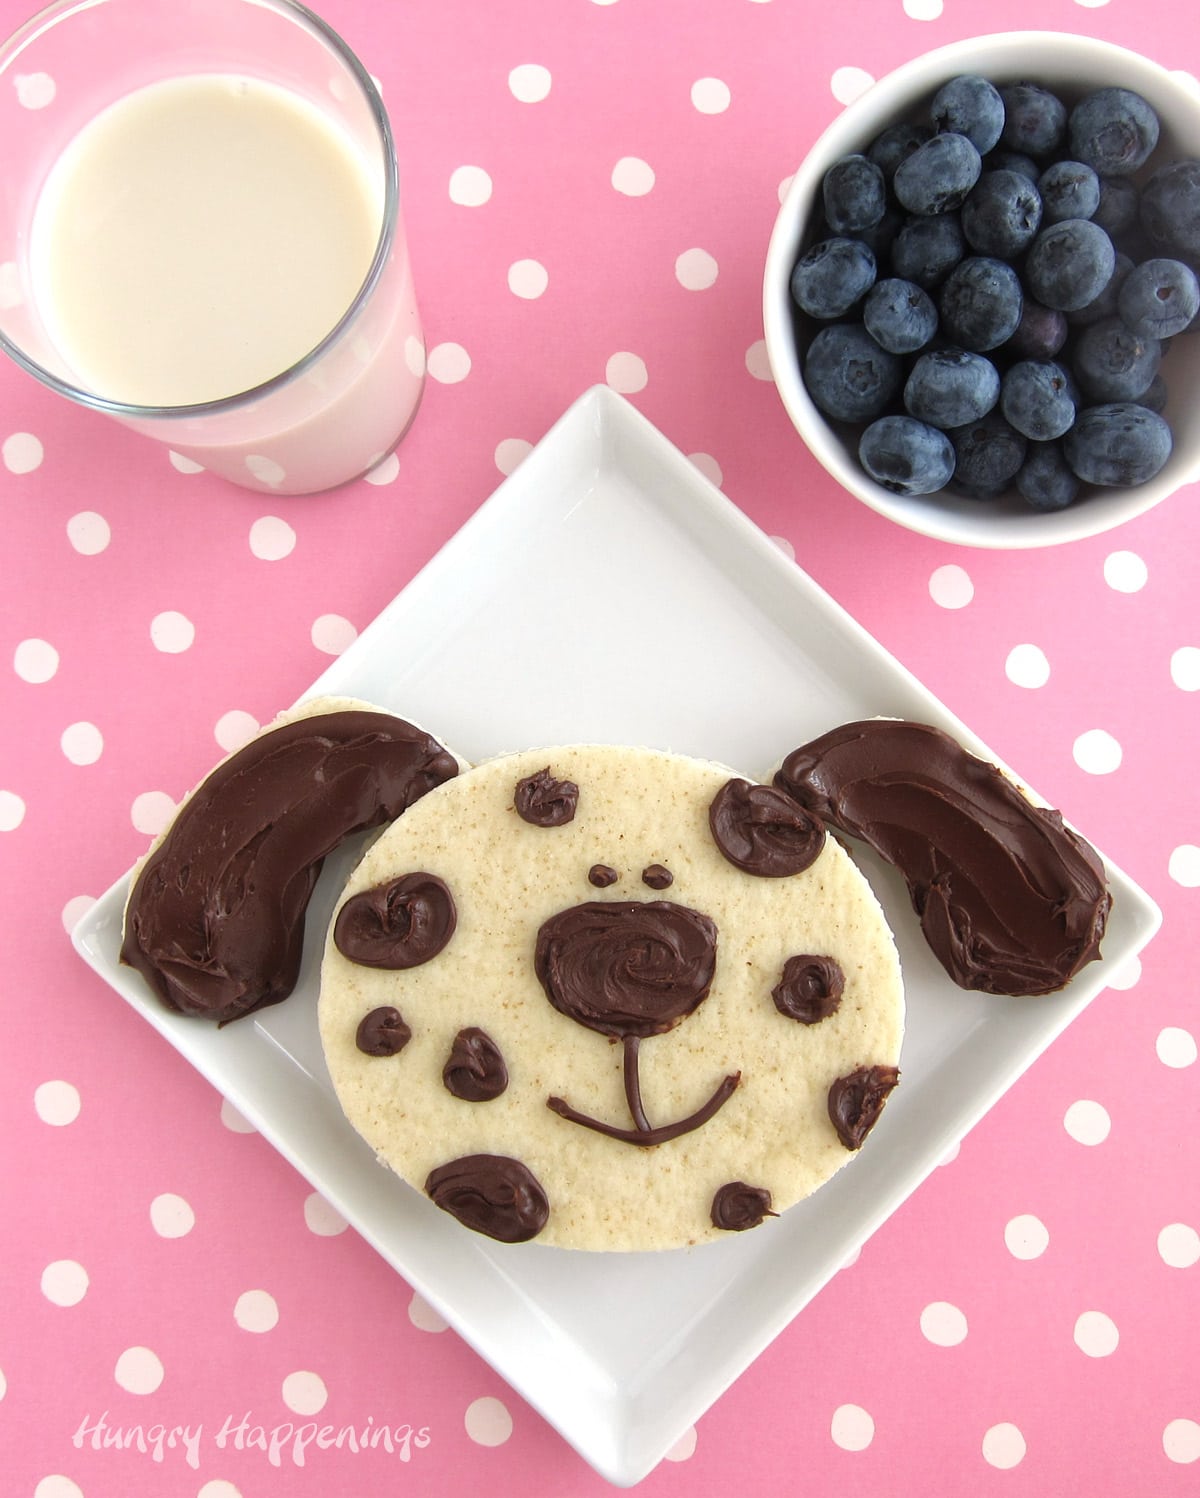 cute dog sandwich made with Nutella is served on a white plate with a glass of milk and bowl of blueberries. 